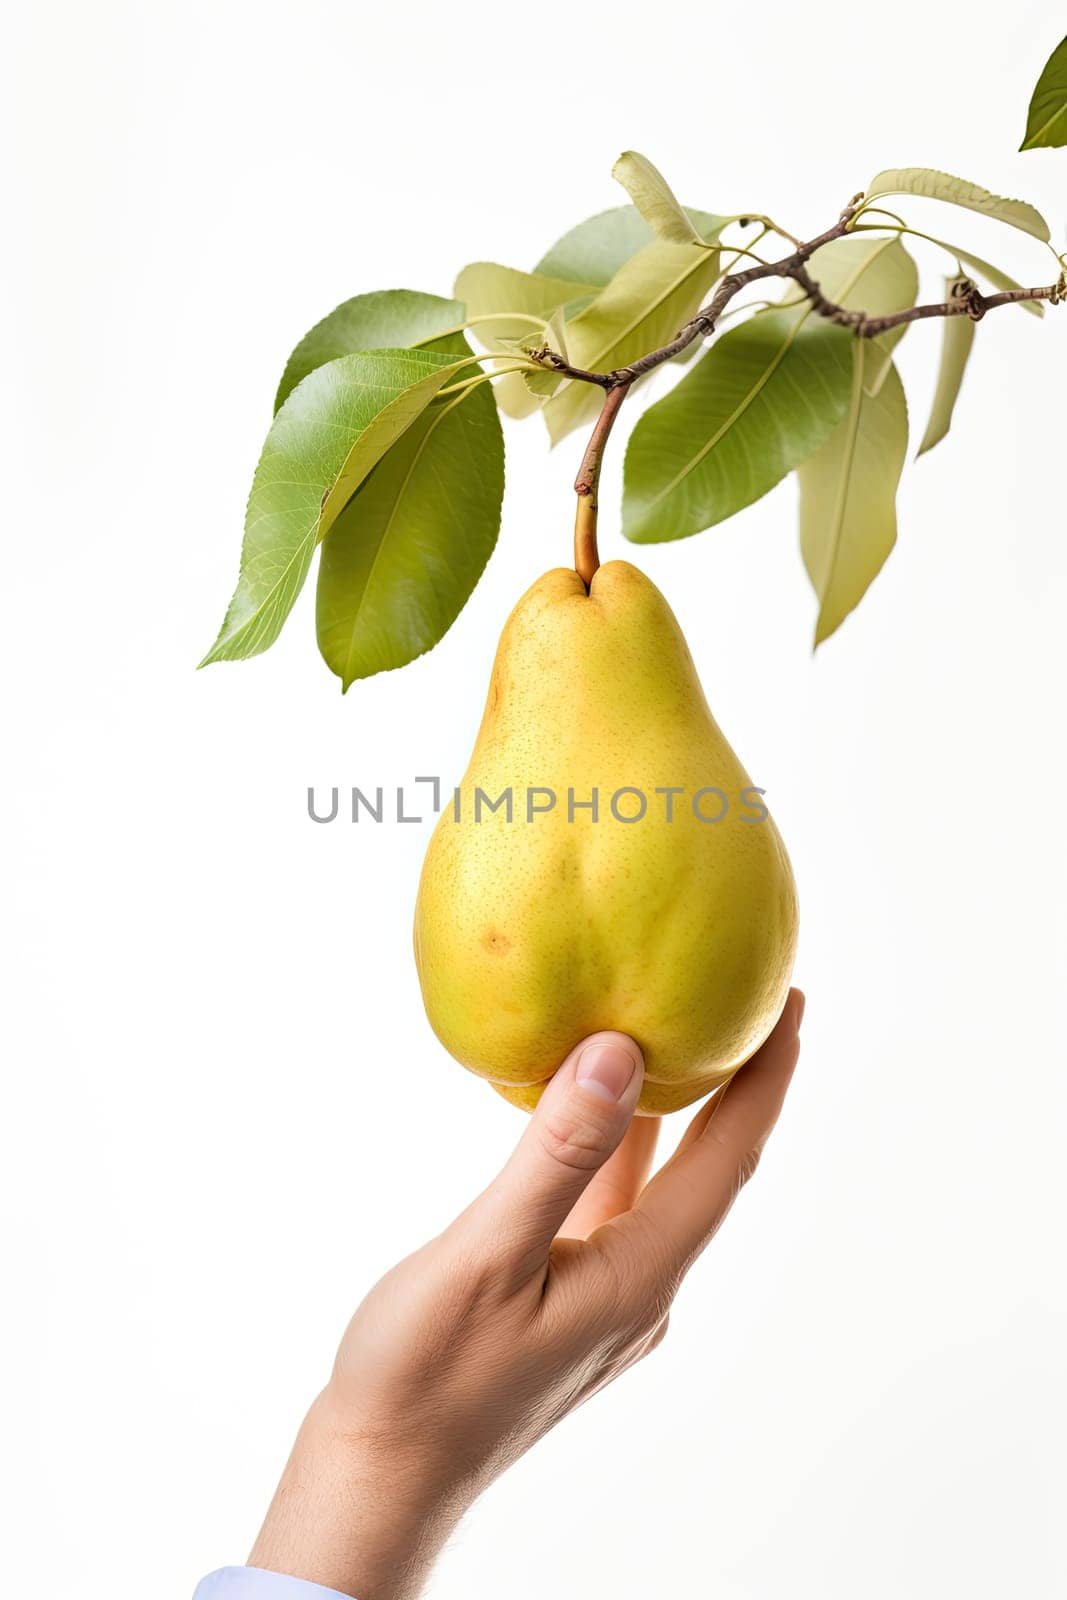 Hand picking up a lemon from a tree isolated on white background. Choosing a ripe lemon from a tree in studio shot.